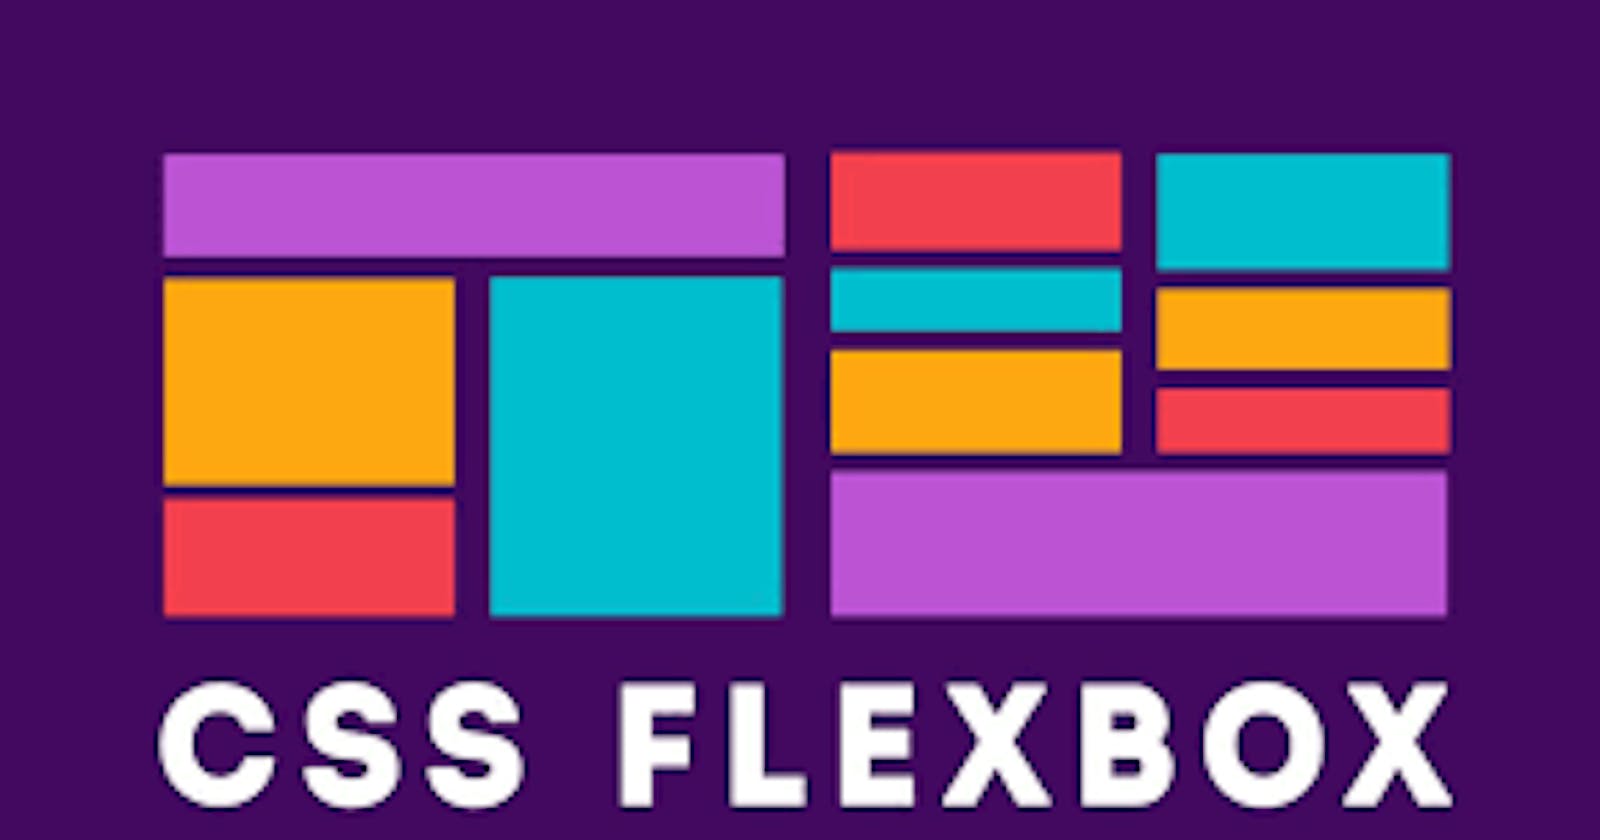 Flexbox: Simplify CSS Layouts with Flexible Box Model